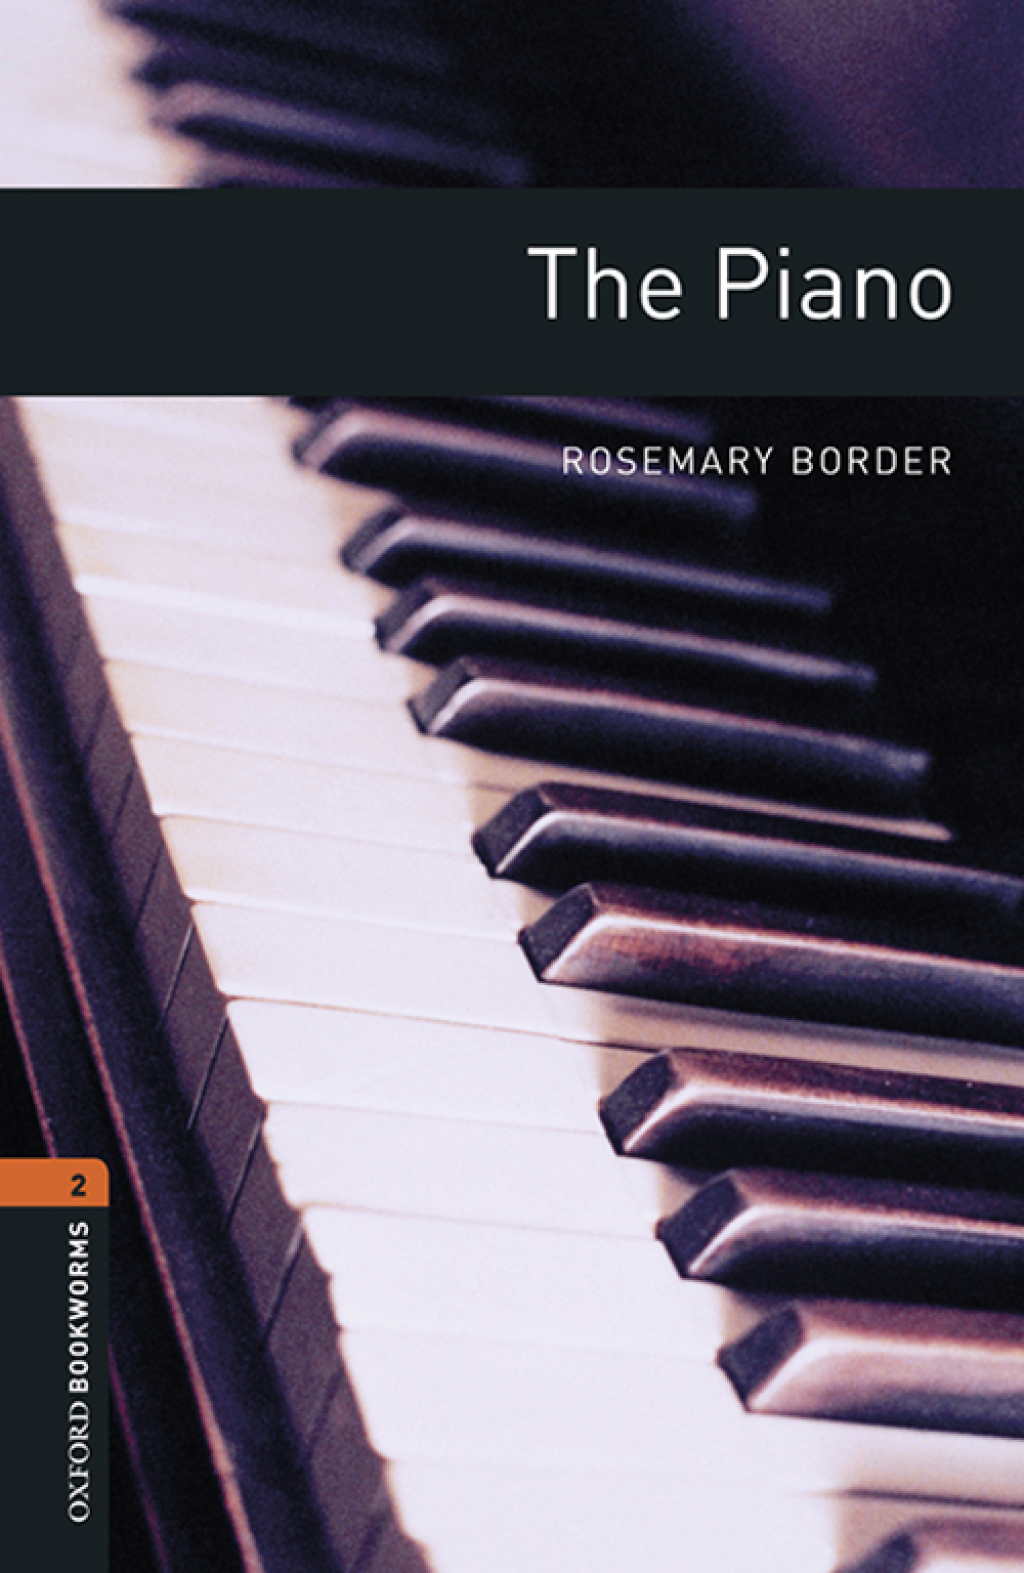 The Piano Level 2 Oxford Bookworms Library - 3rd Edition (eBook Rental)